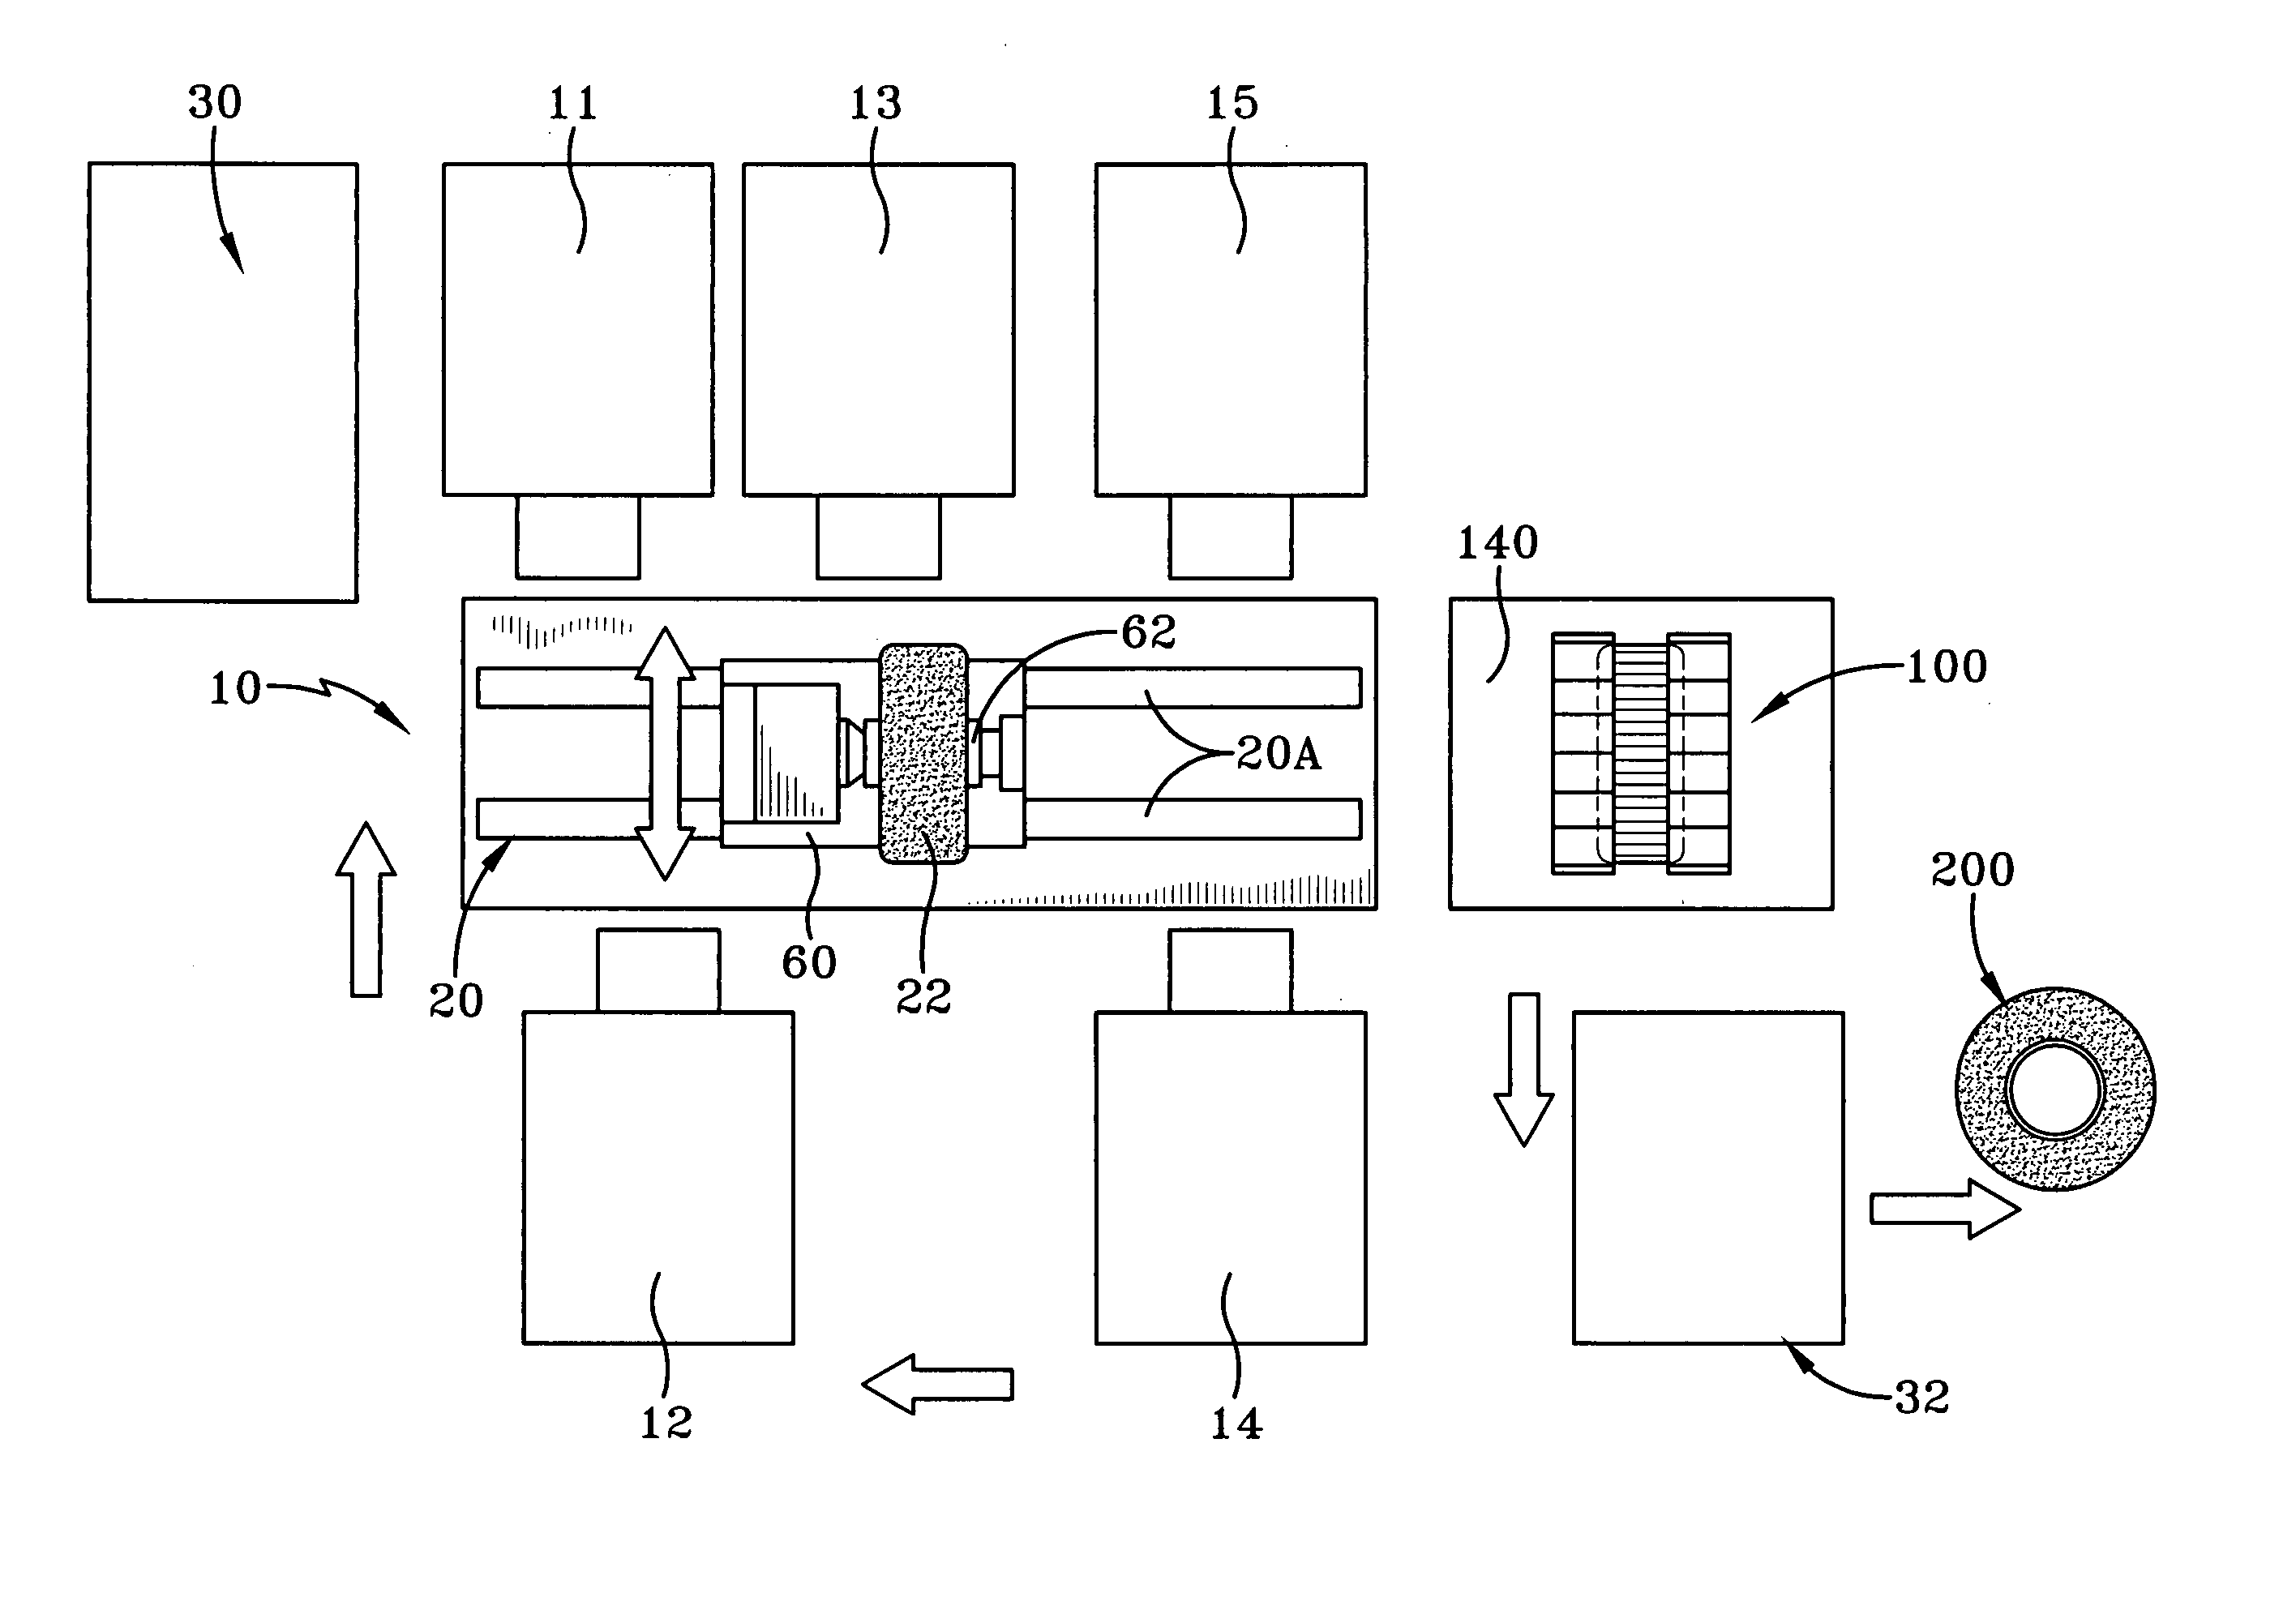 Tire manufacturing module and method of manufacturing tires